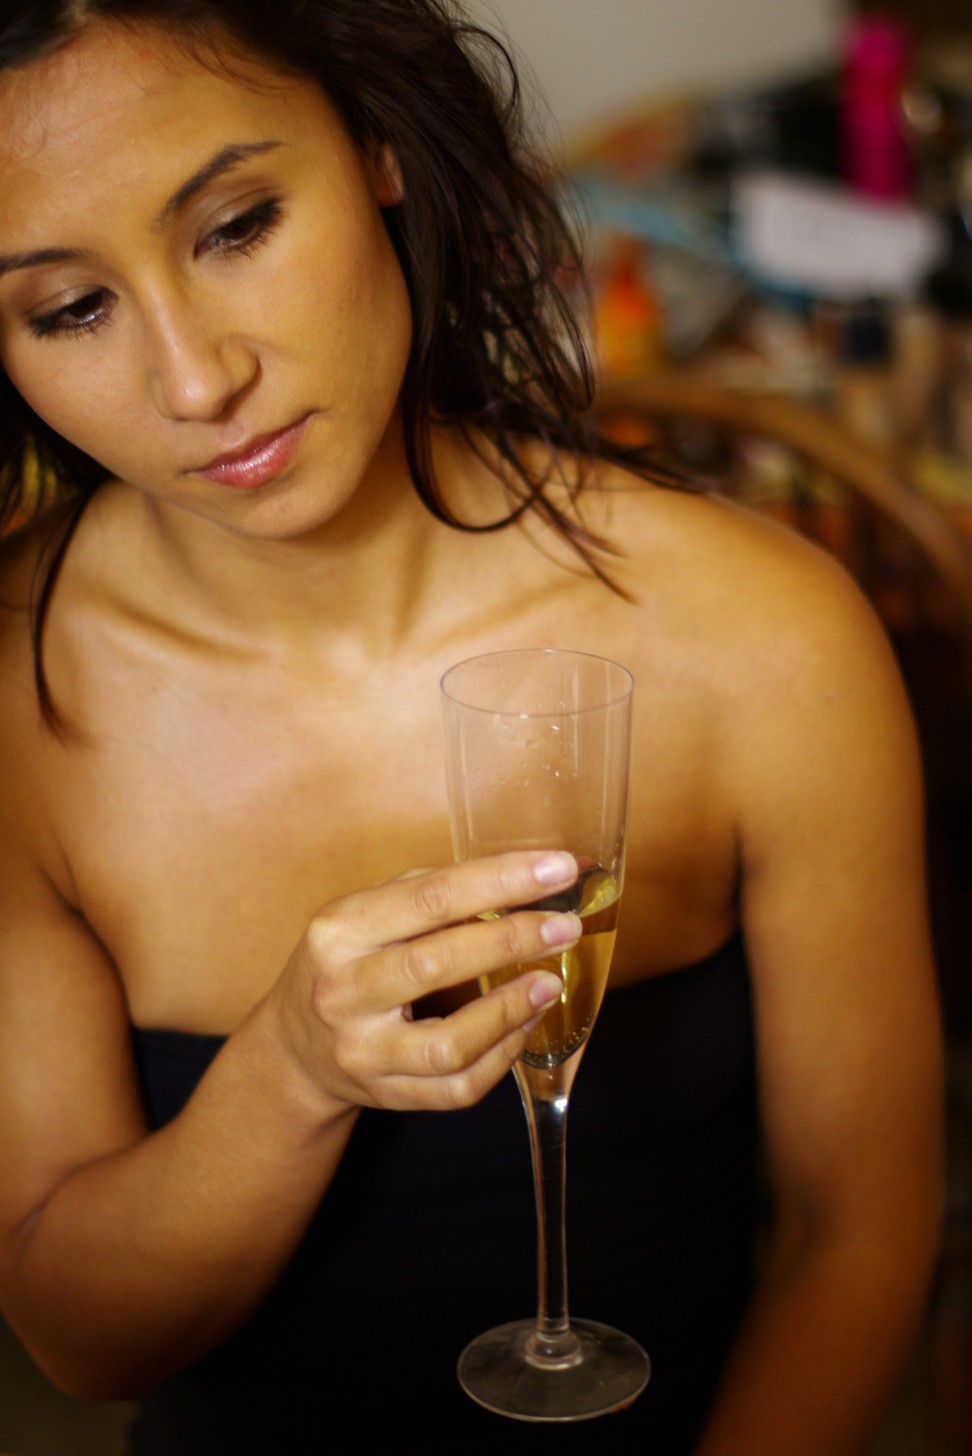 A Swedish study has found alcohol consumption and binge drinking in women is significantly associated with higher blood glucose levels. Photo: Alamy